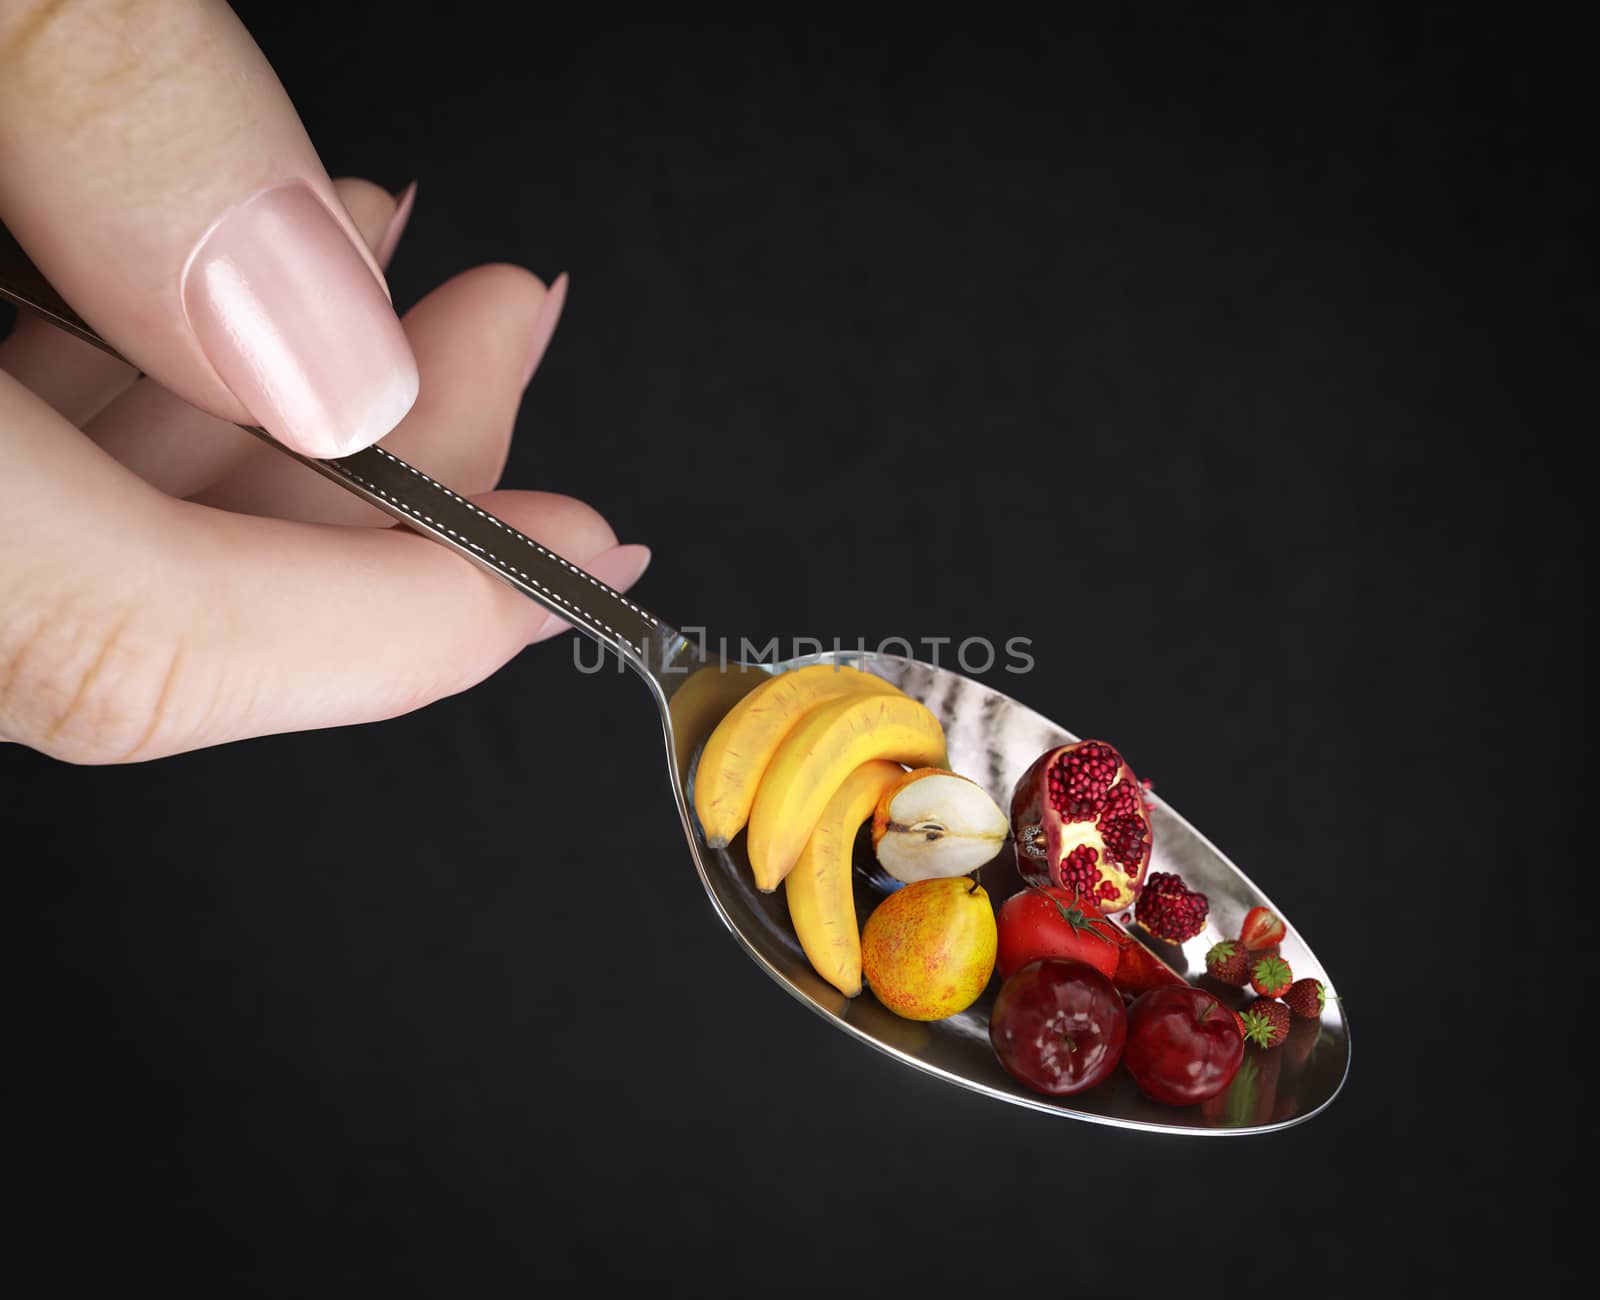 woman hand holding spoon with fruits on isolate black diet concept photo closeup by denisgo